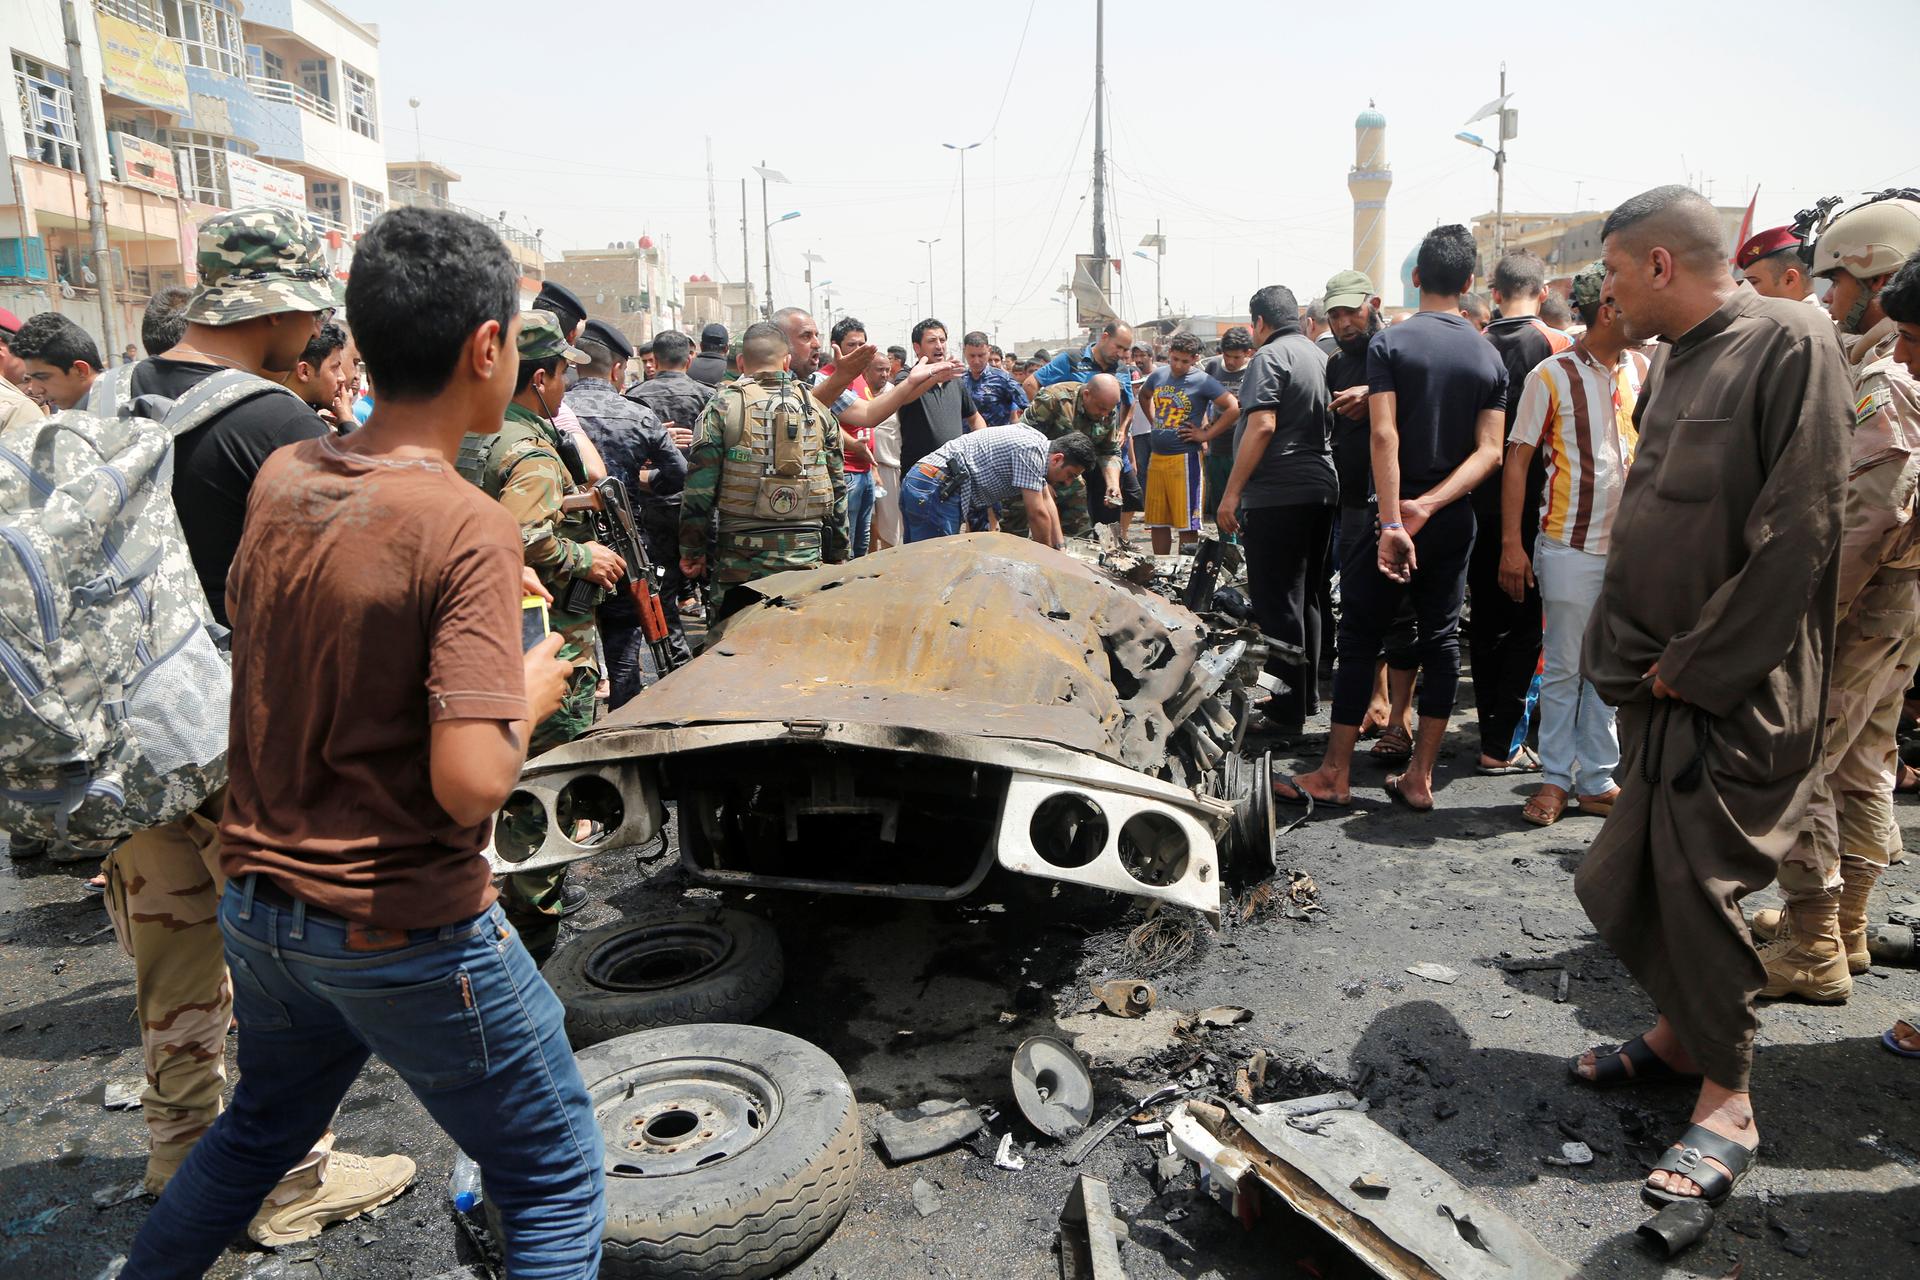 People gather at the scene of a car bomb attack in Baghdad's mainly Shi'ite district of Sadr City, Iraq, on May 11, 2016.